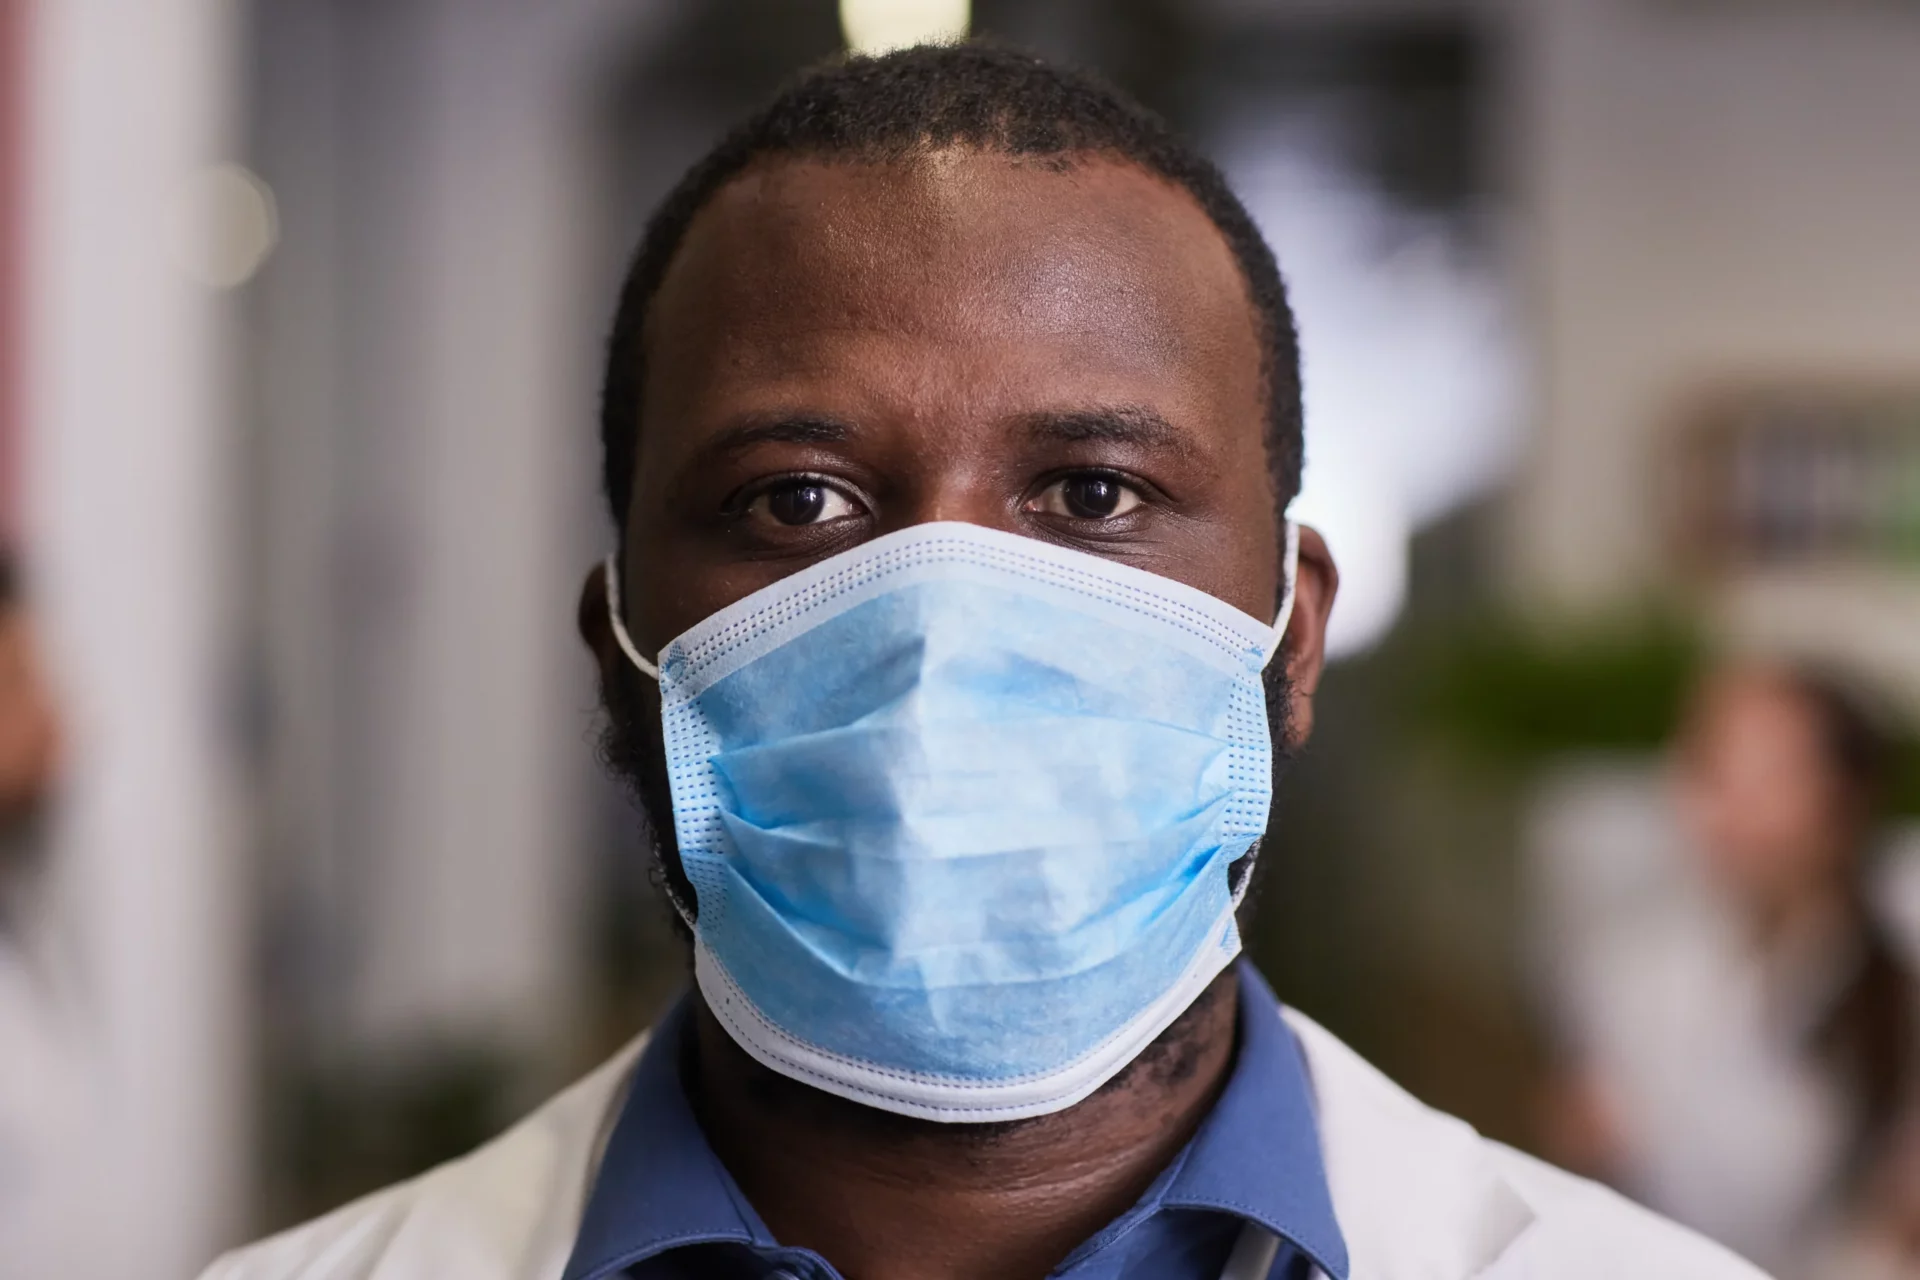 A physician standing in the hospital wearing a mask on his face